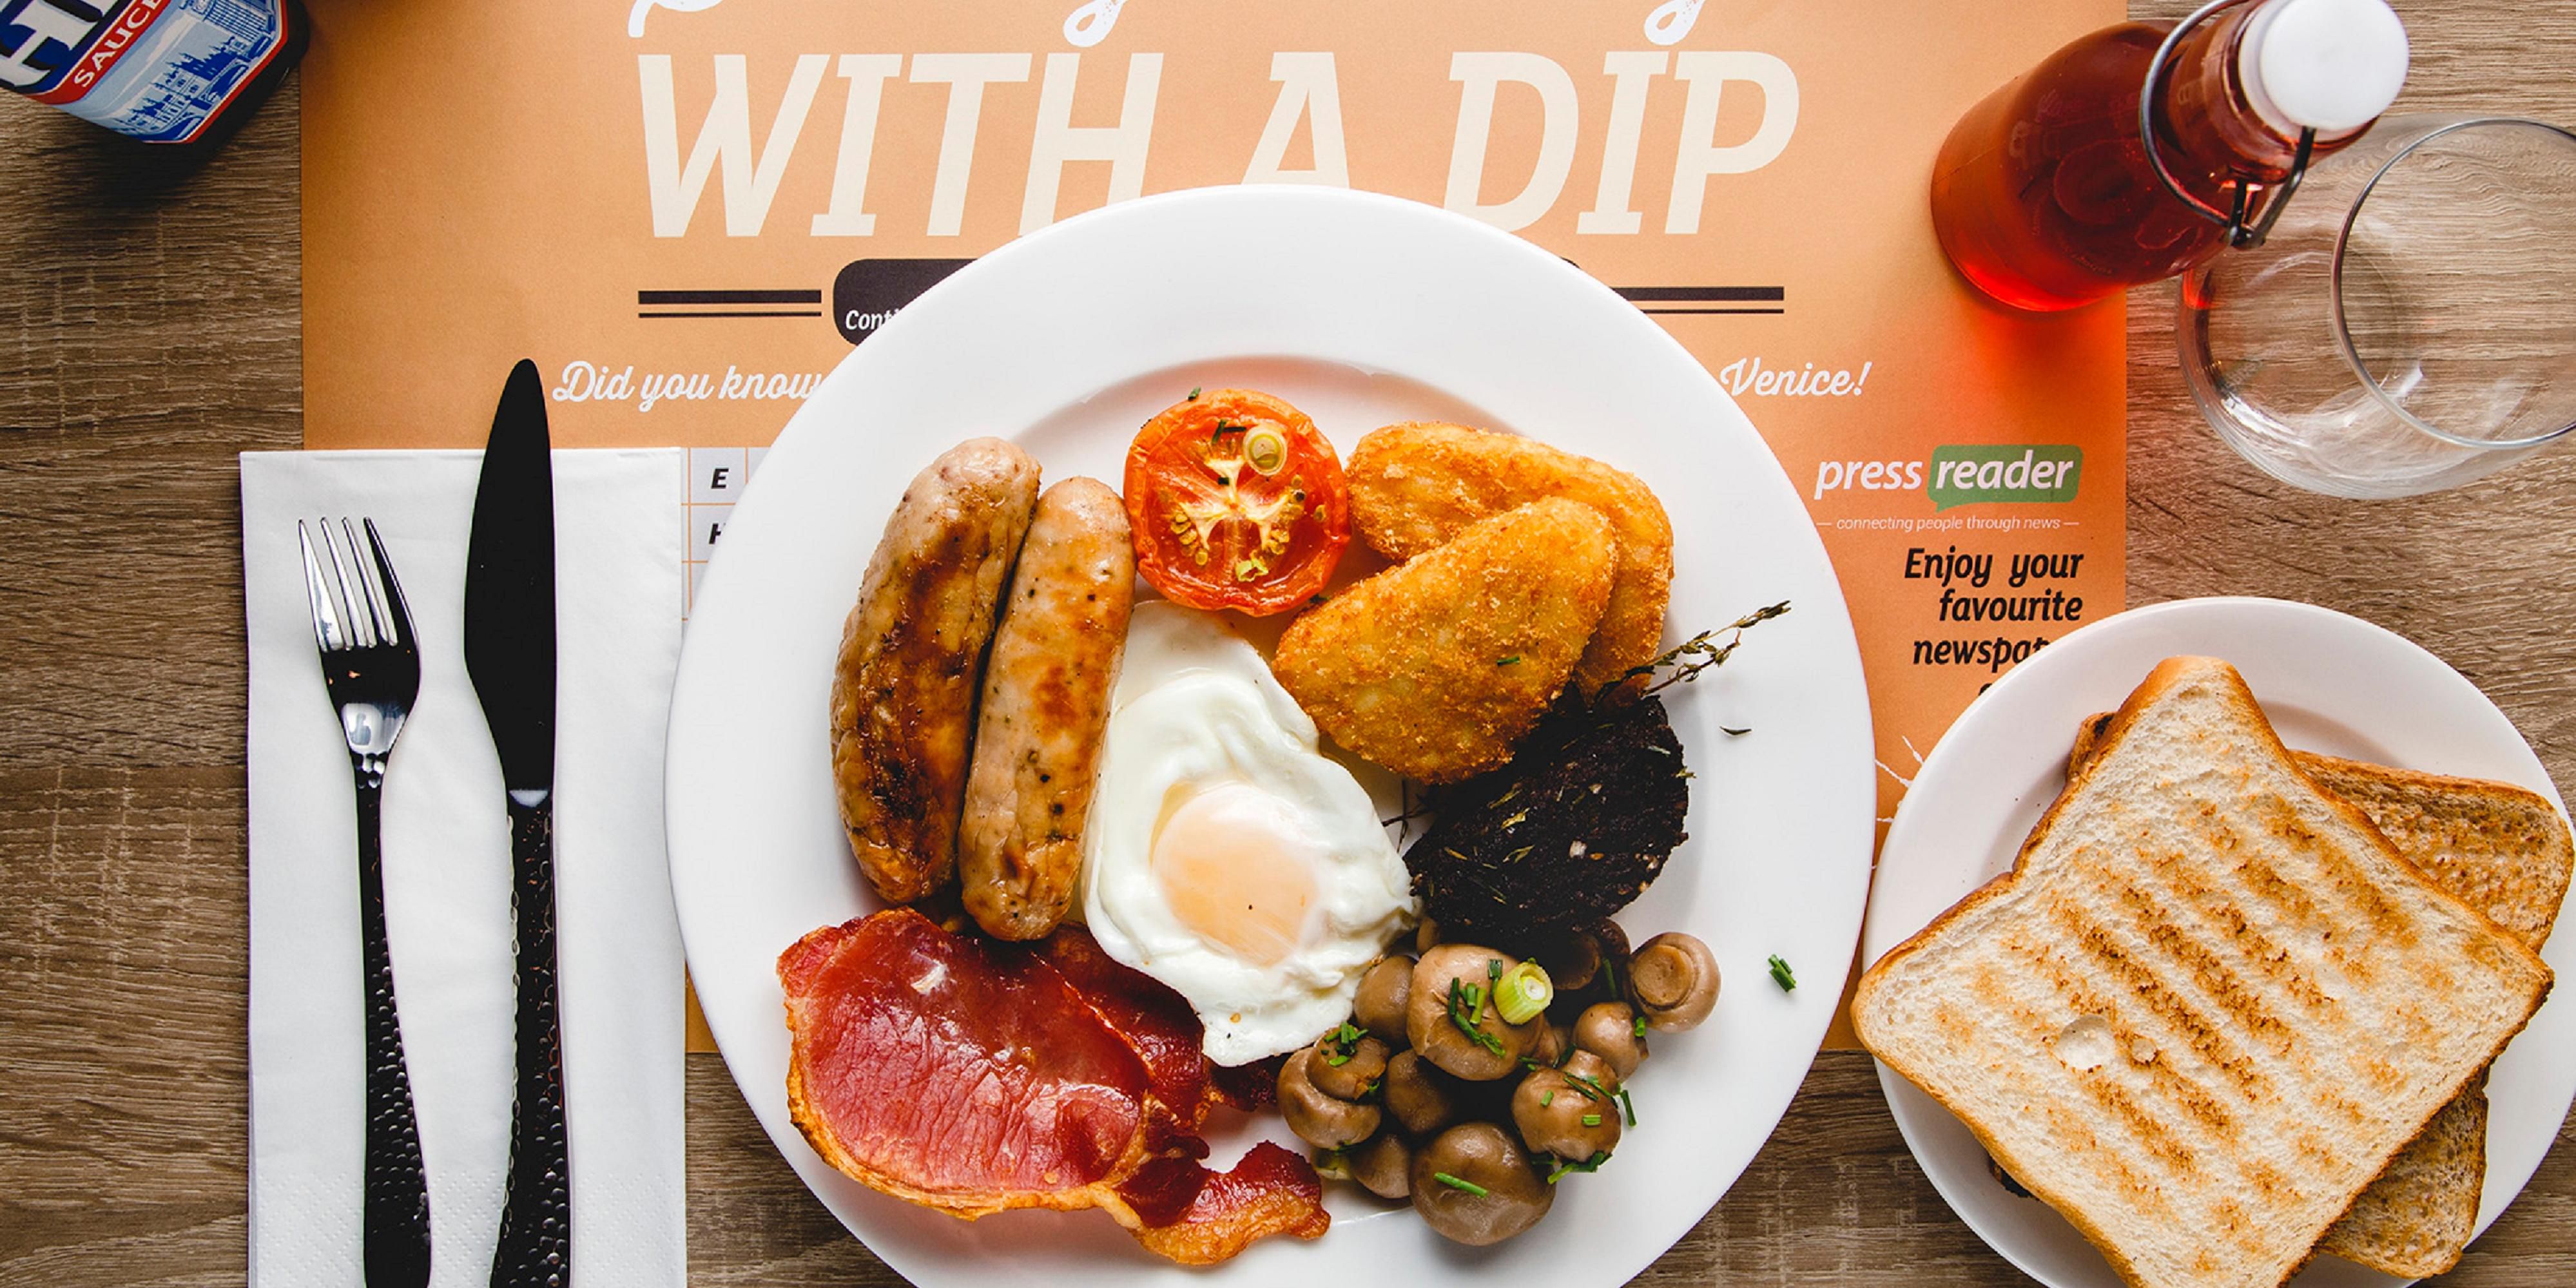 Start your day with a dip as part of a Full English Breakfast